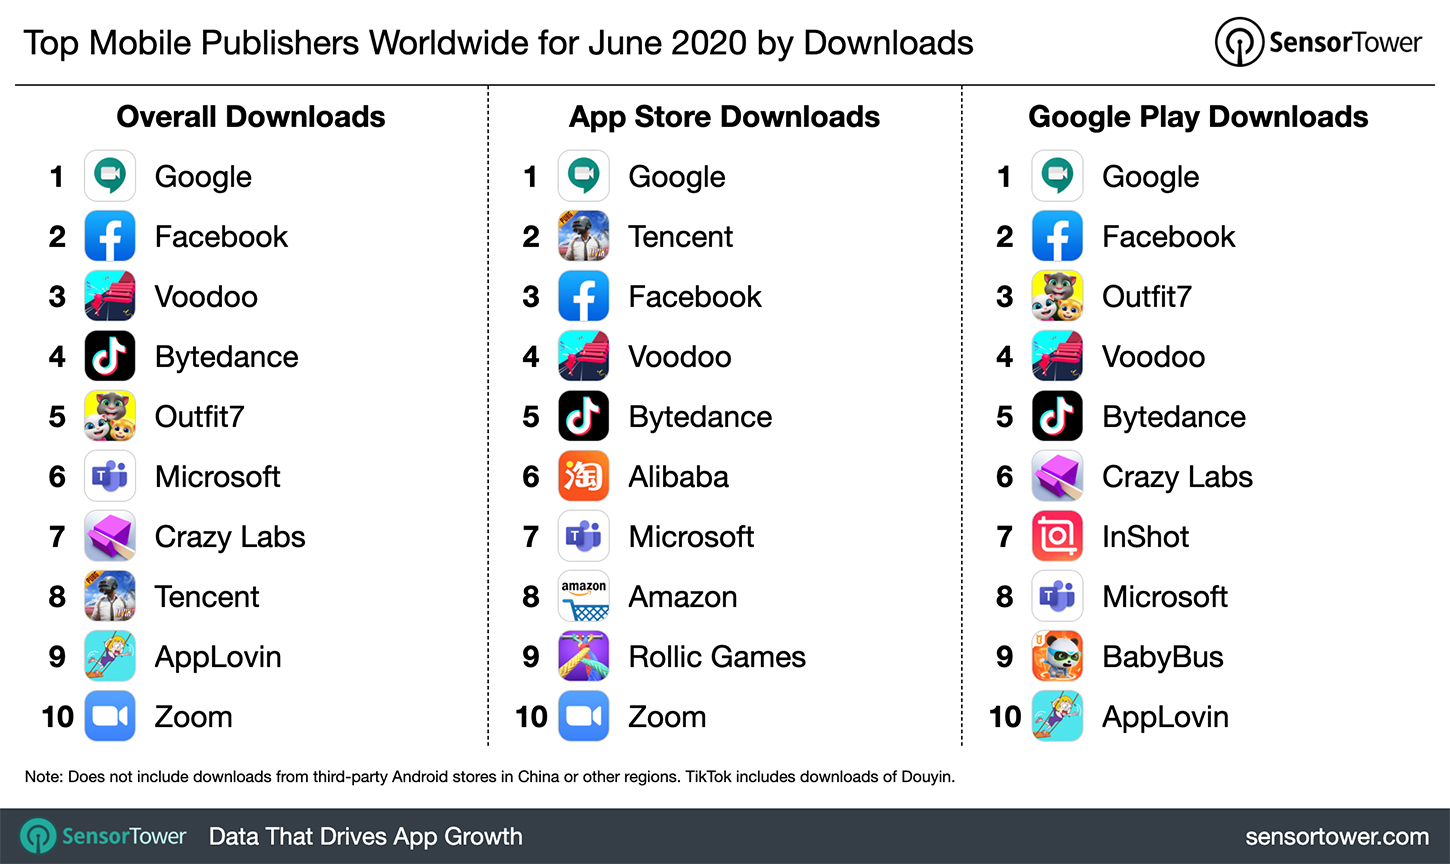 Top Mobile Publishers Worldwide for June 2020 by Downloads